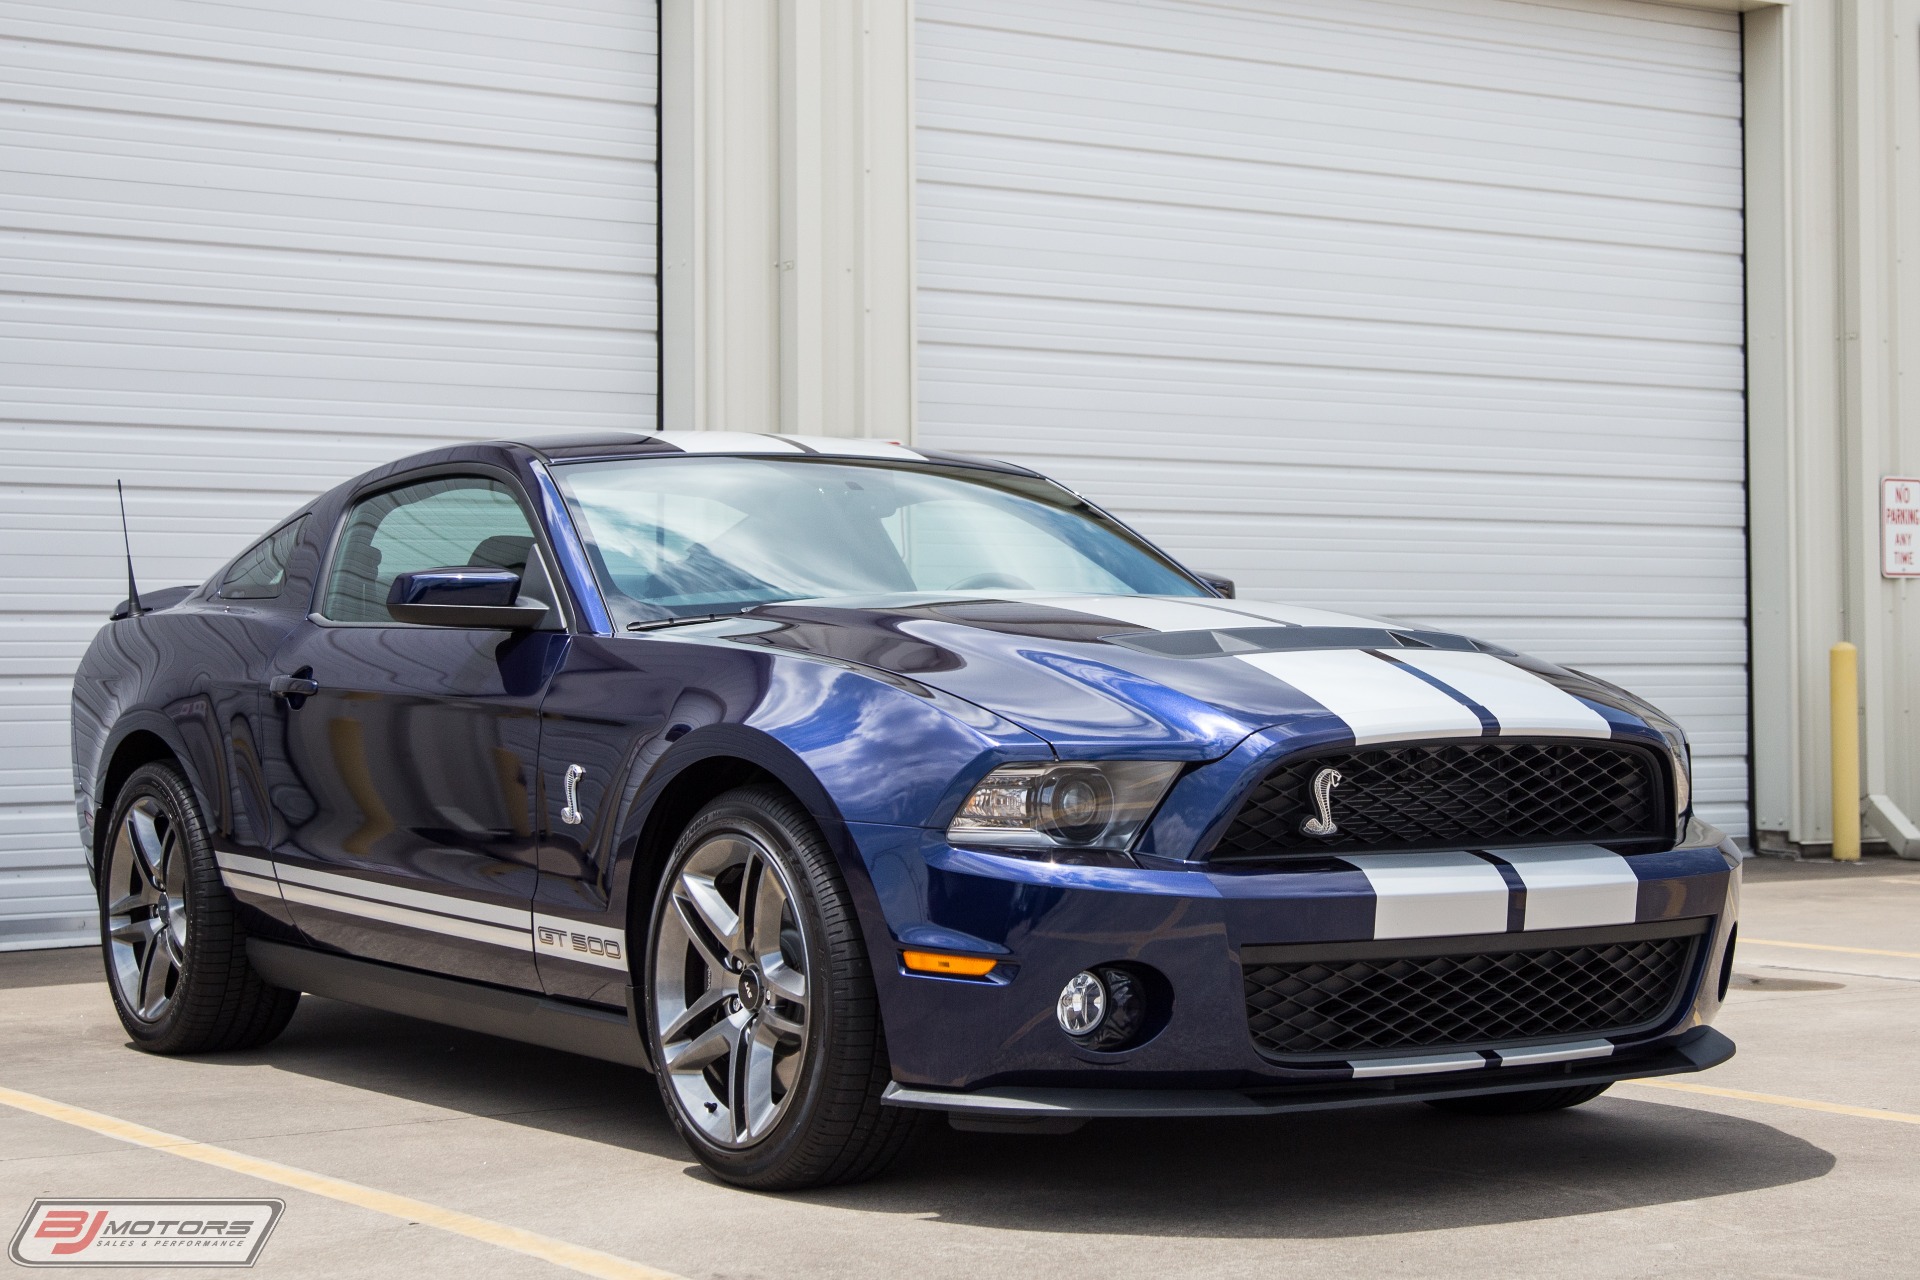 Used 2010 Ford Mustang Shelby GT500 Only 187 Miles For Sale $52995.